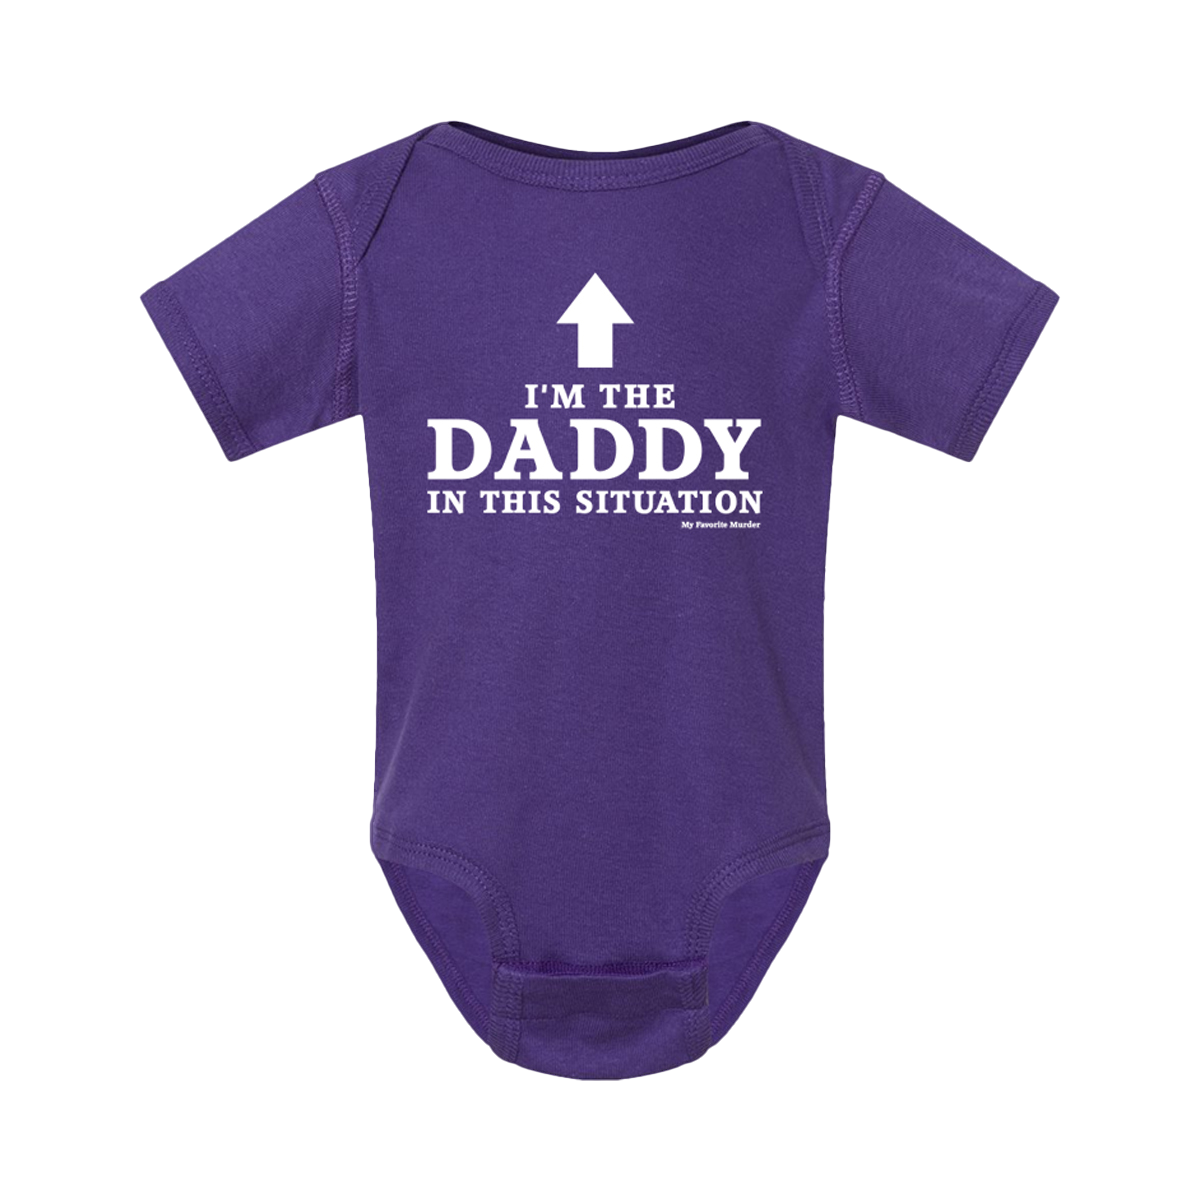 I'm the Daddy Infant One-Piece